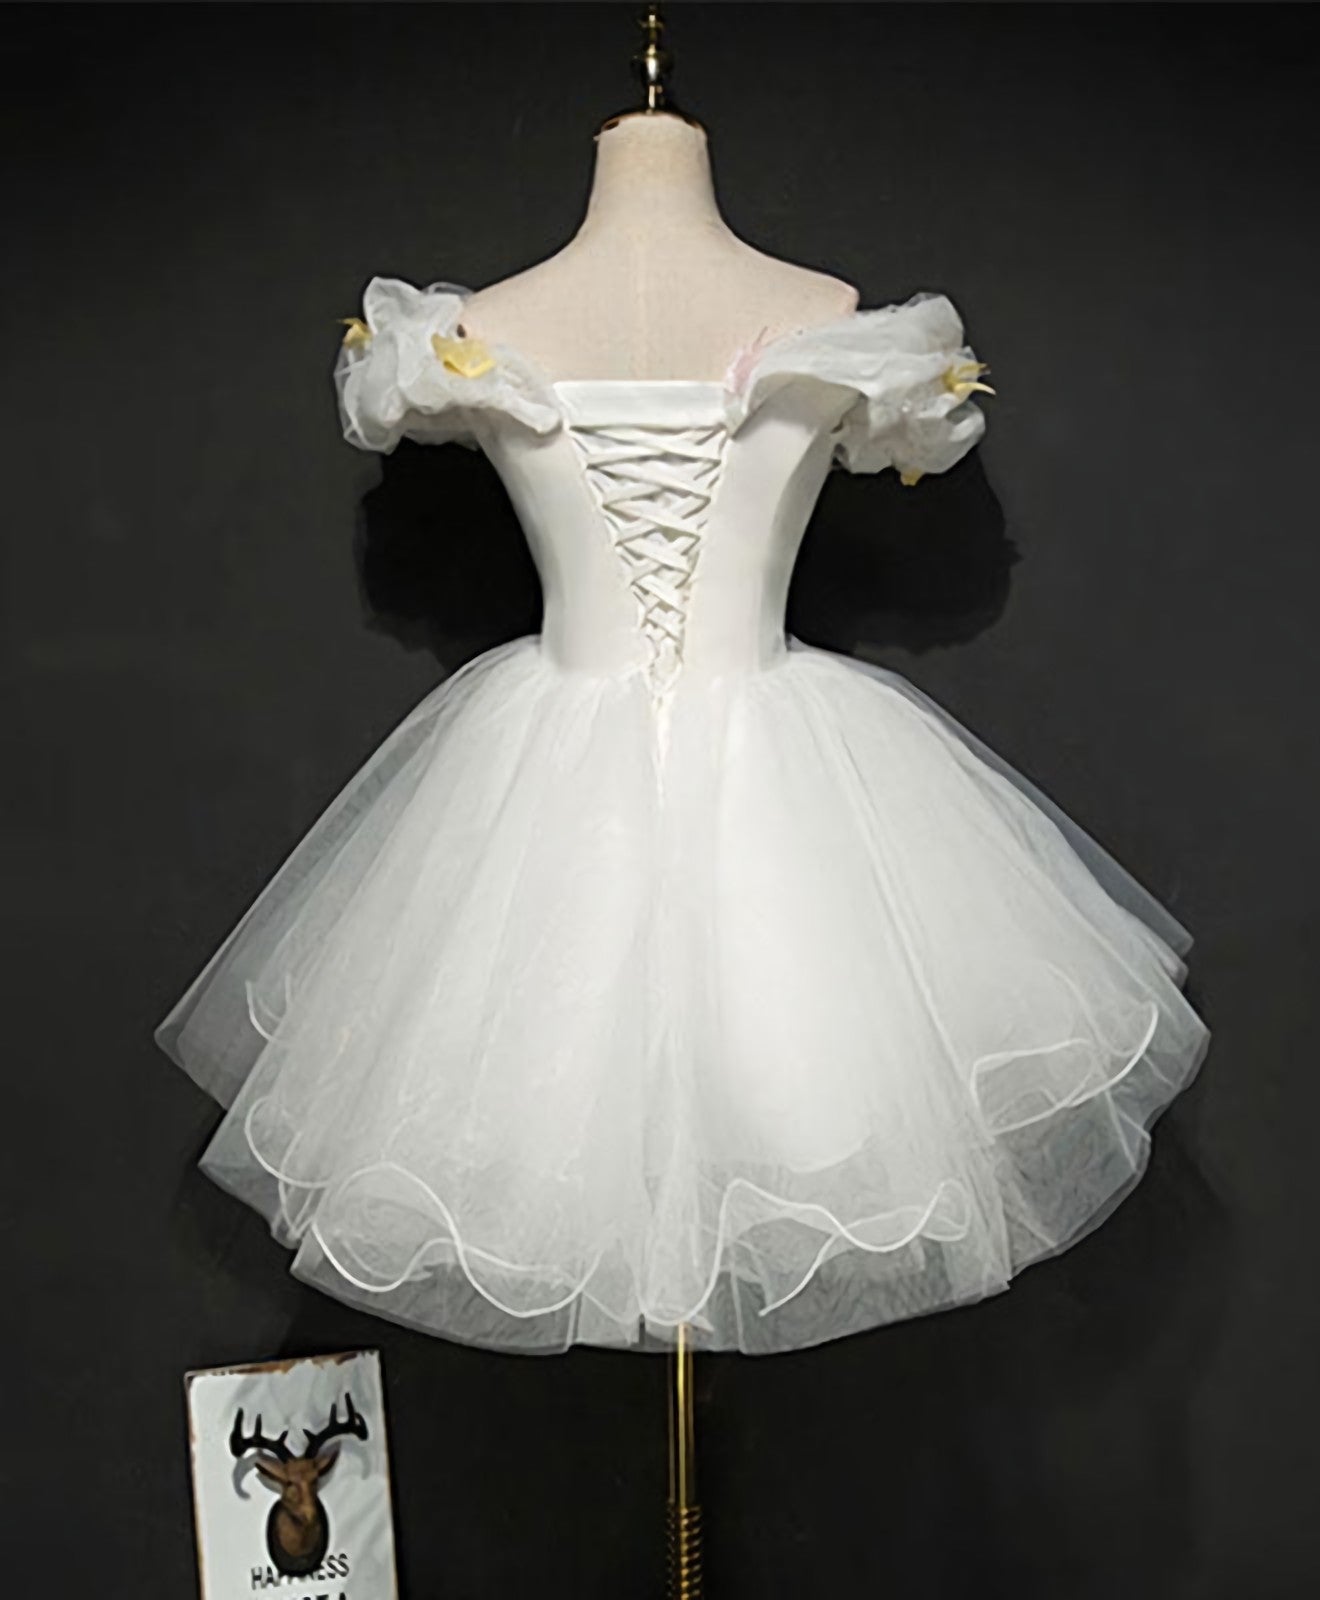 Bridesmaid Dress Designs, Cute White Tulle Short Prom Gown White Homecoming Dress